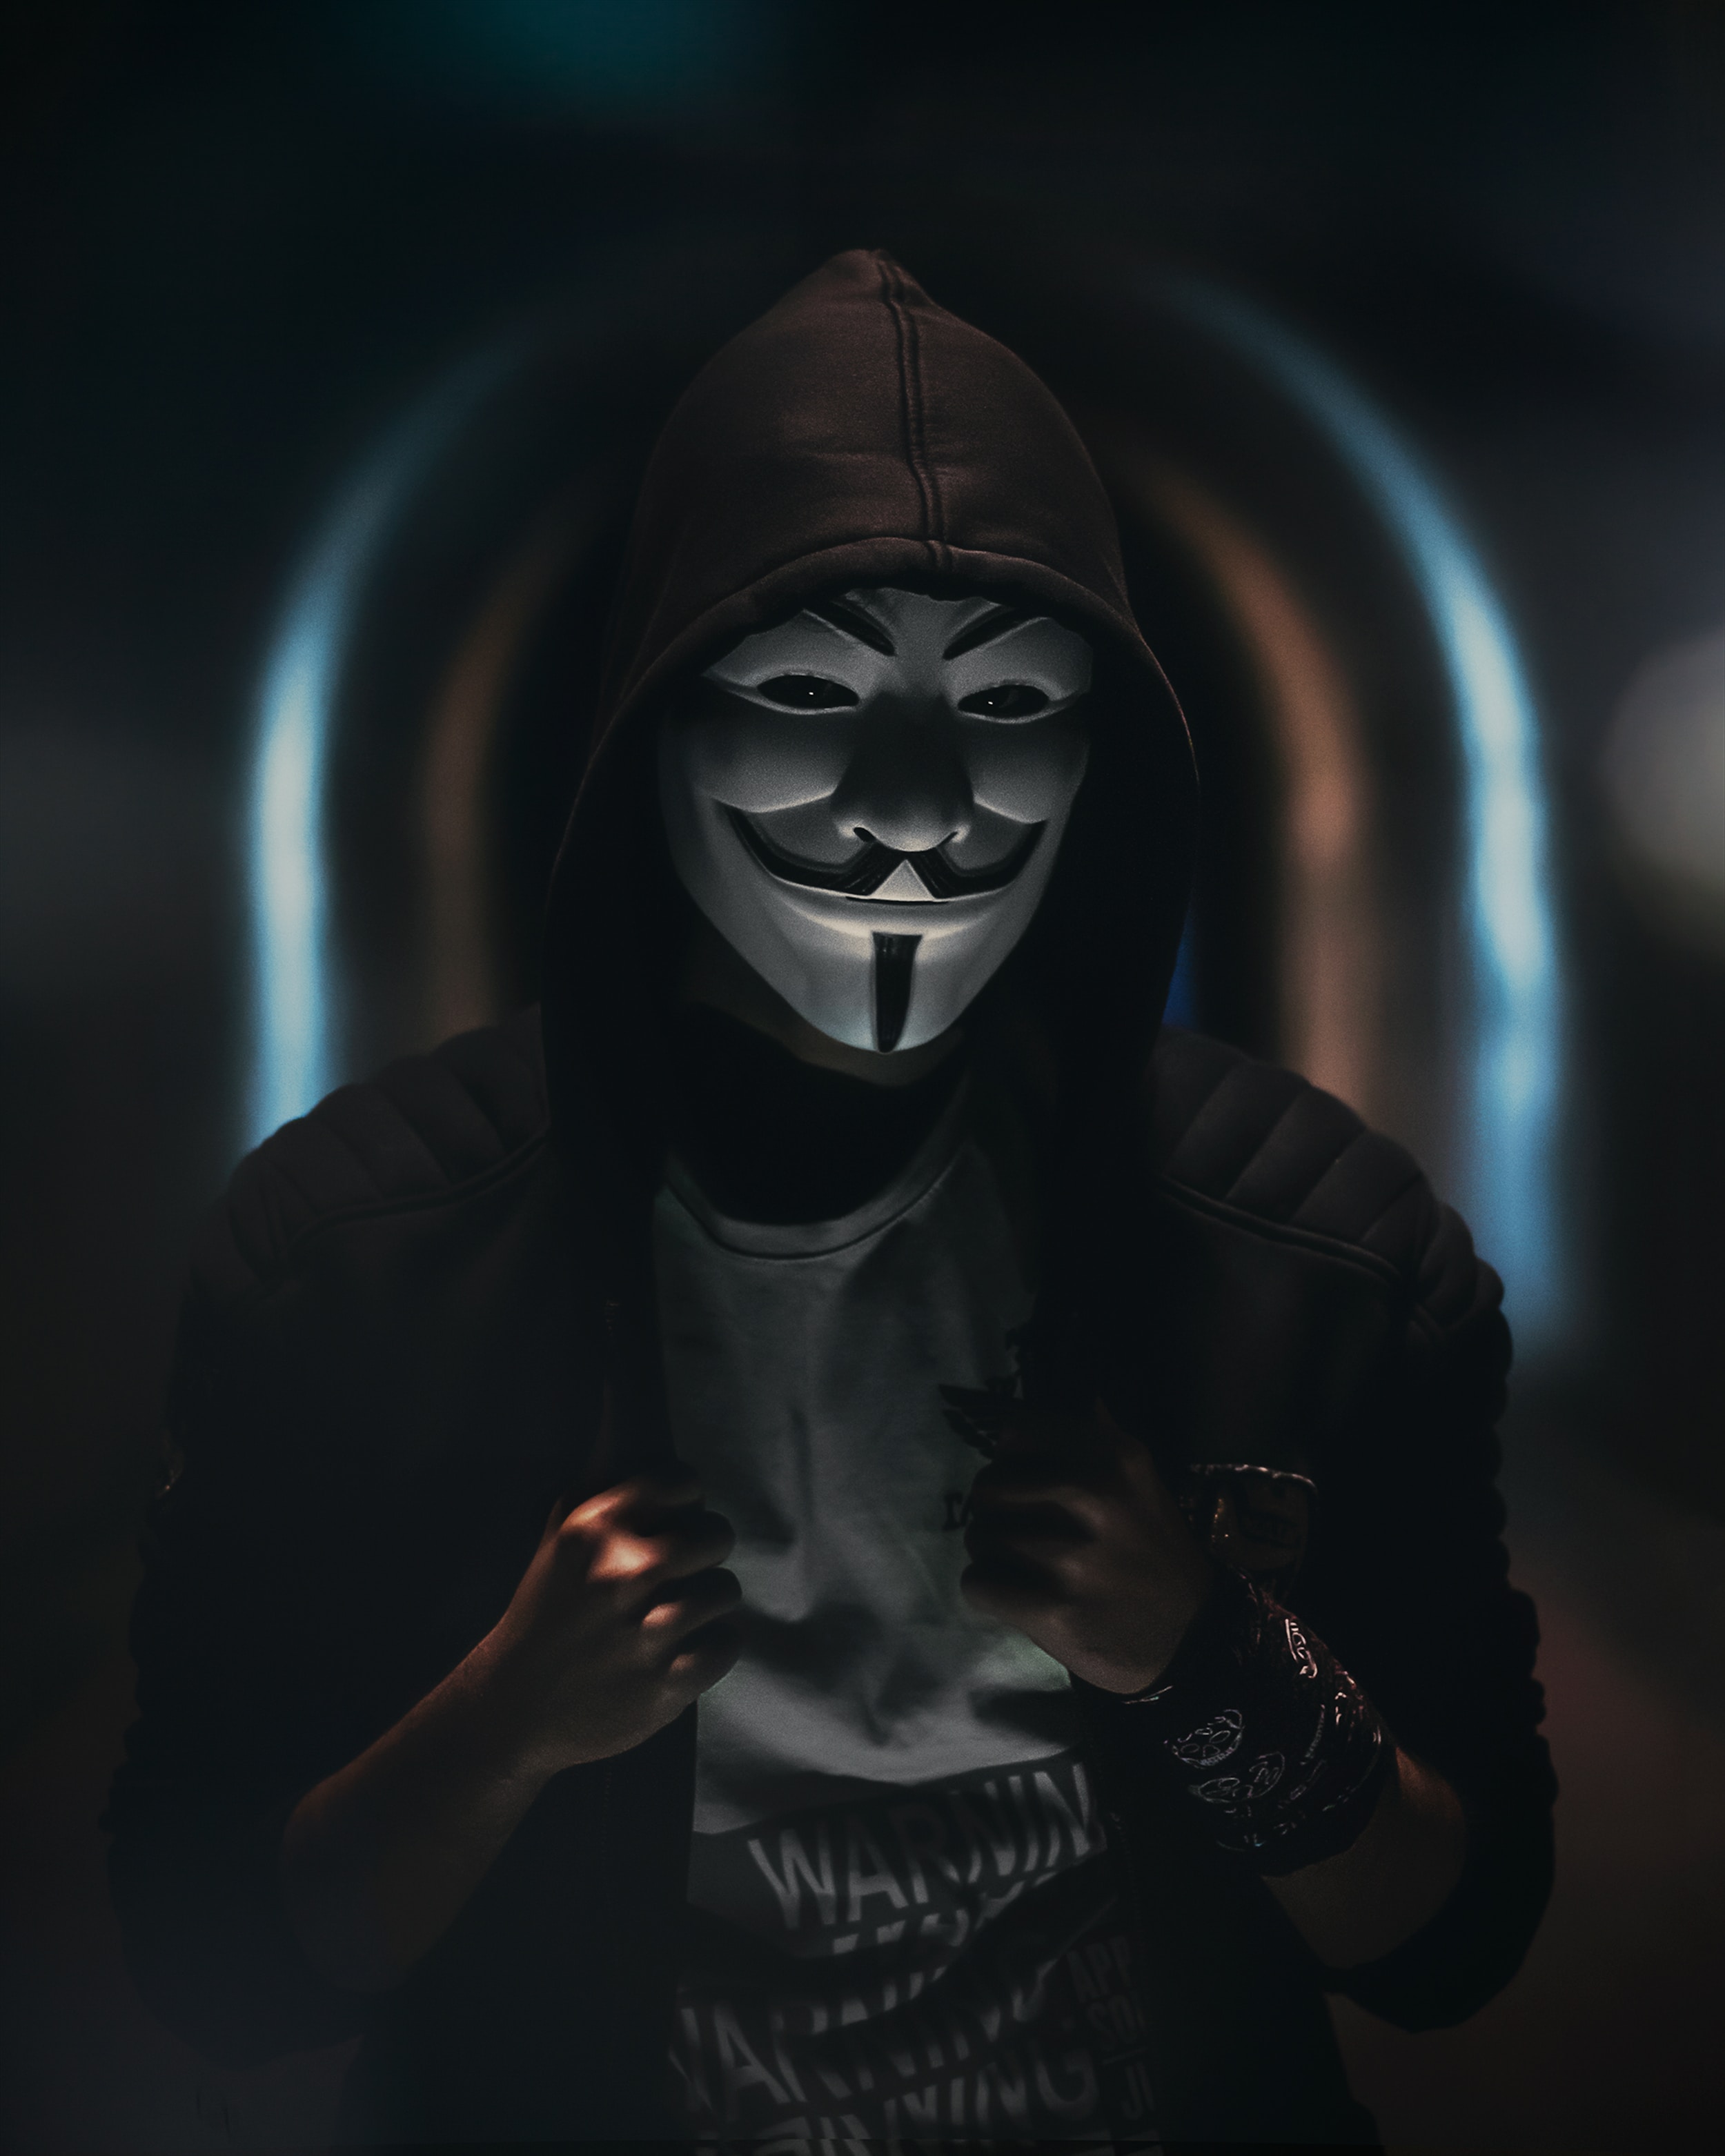 dark, anonymous, miscellanea, miscellaneous, mask, human, person, hood High Definition image